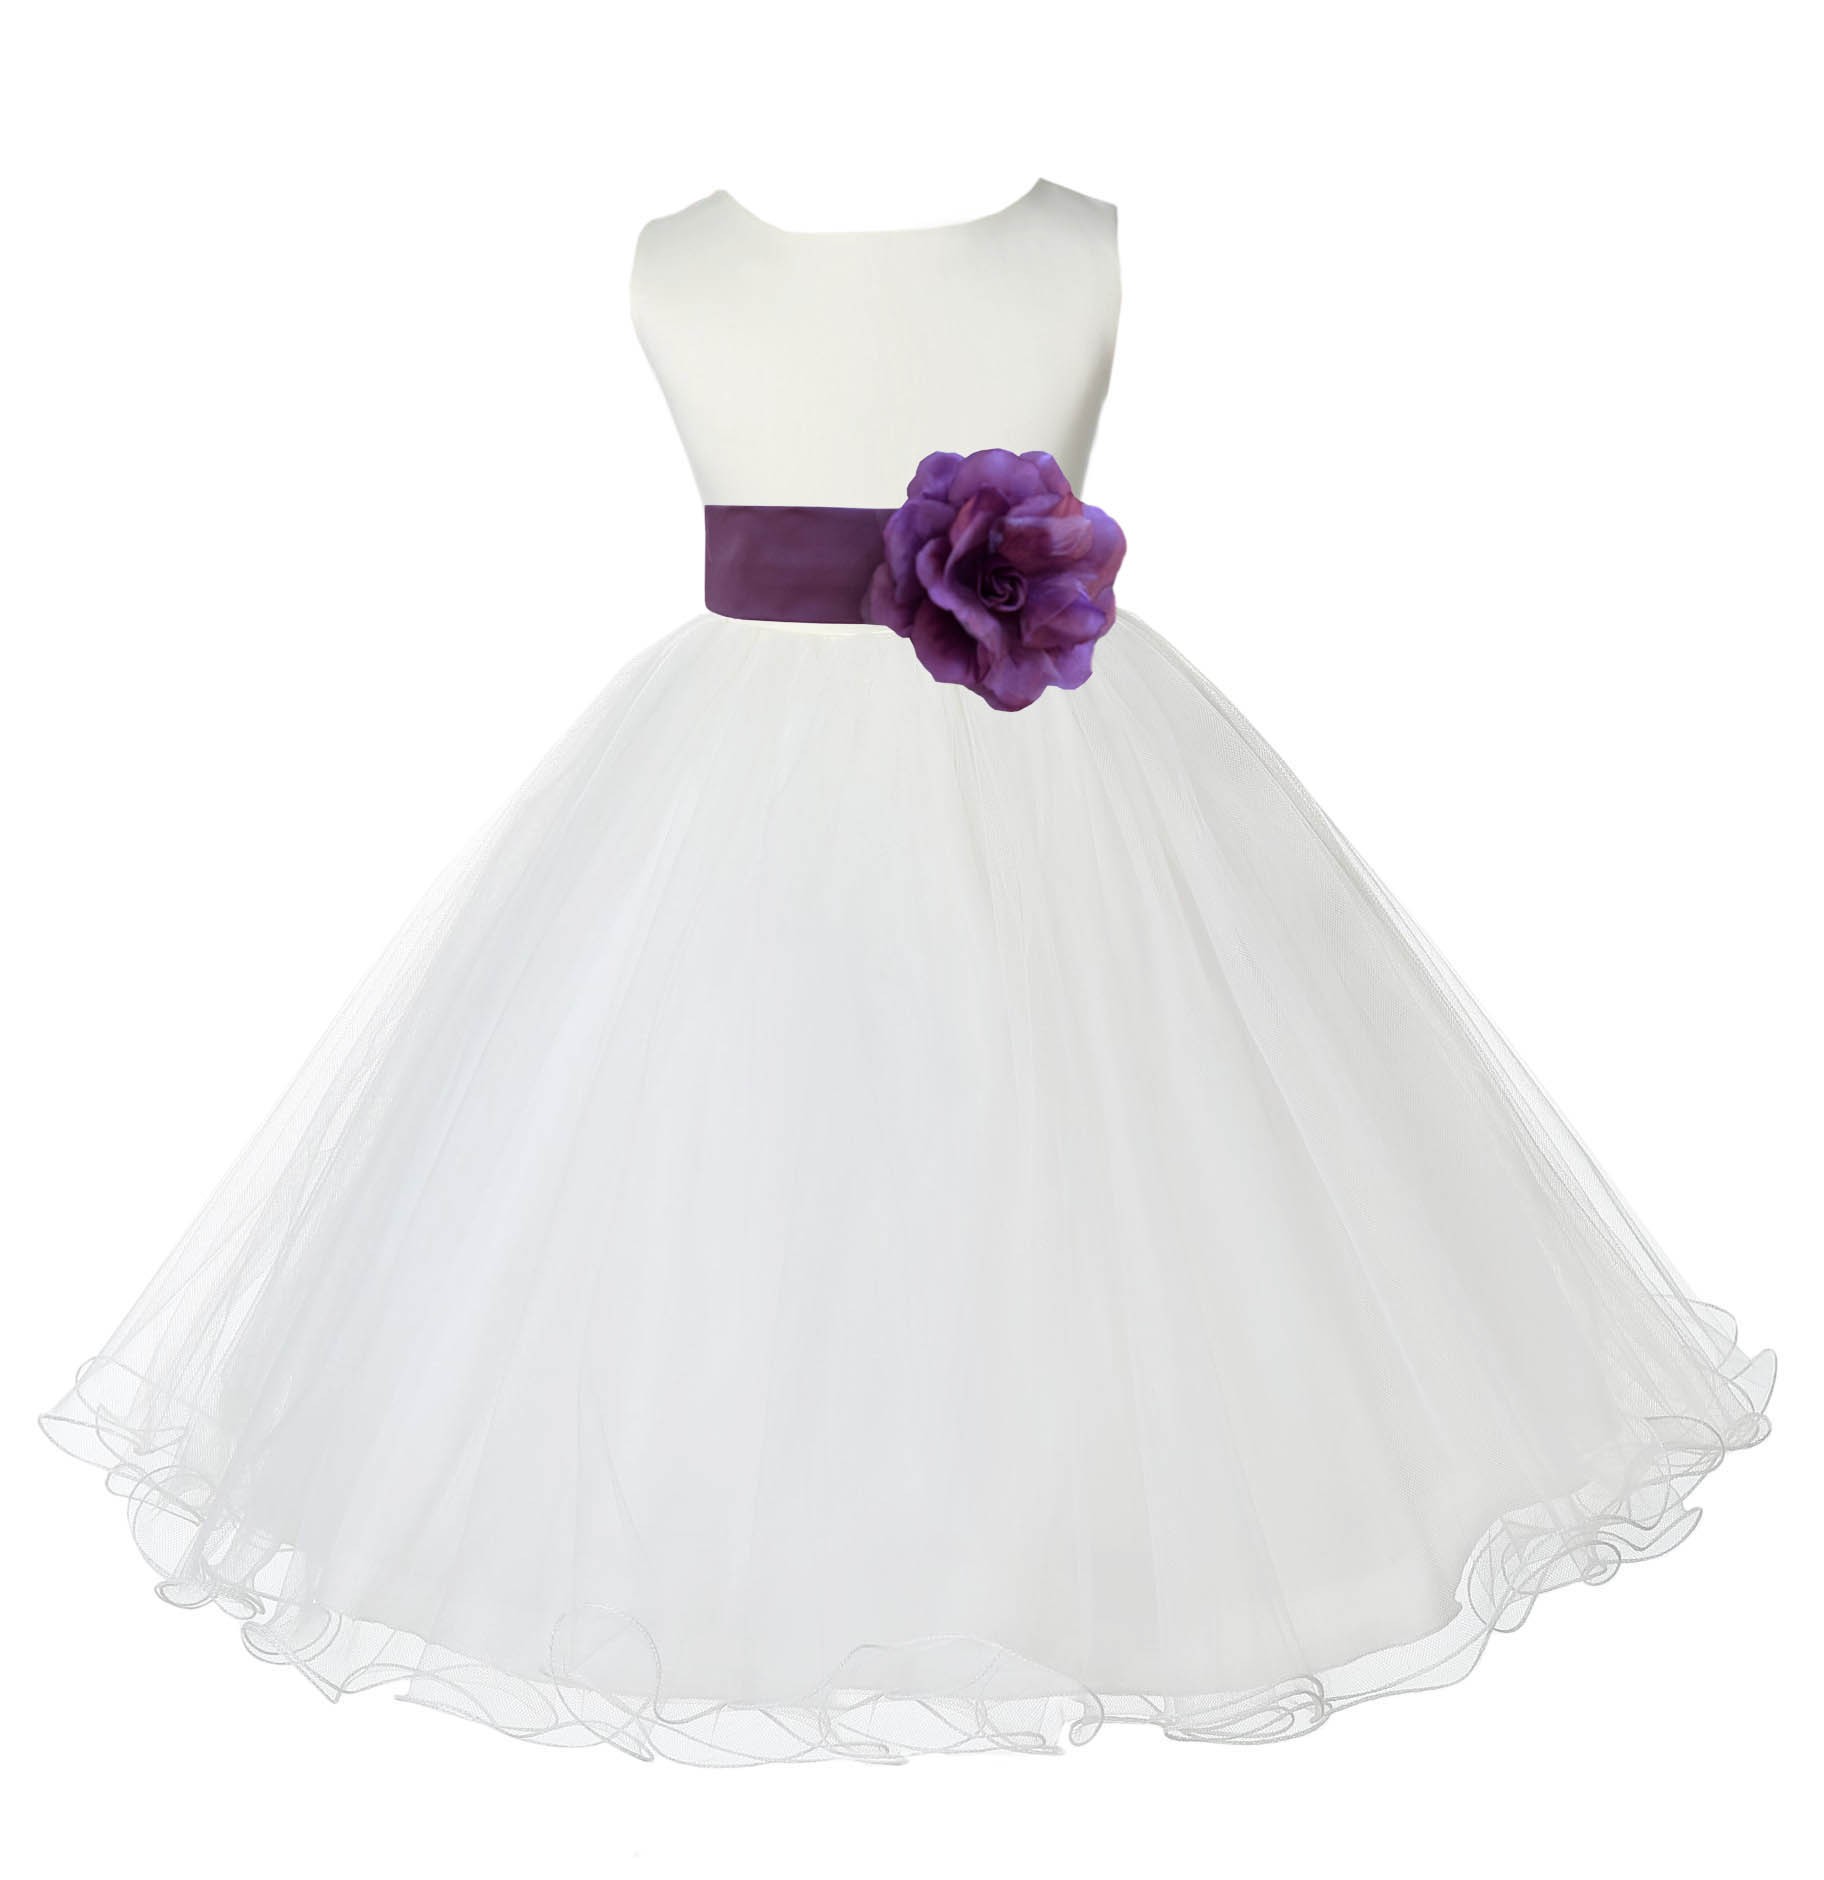 Ivory/Wisteria Tulle Rattail Edge Flower Girl Dress Pageant Recital 829S